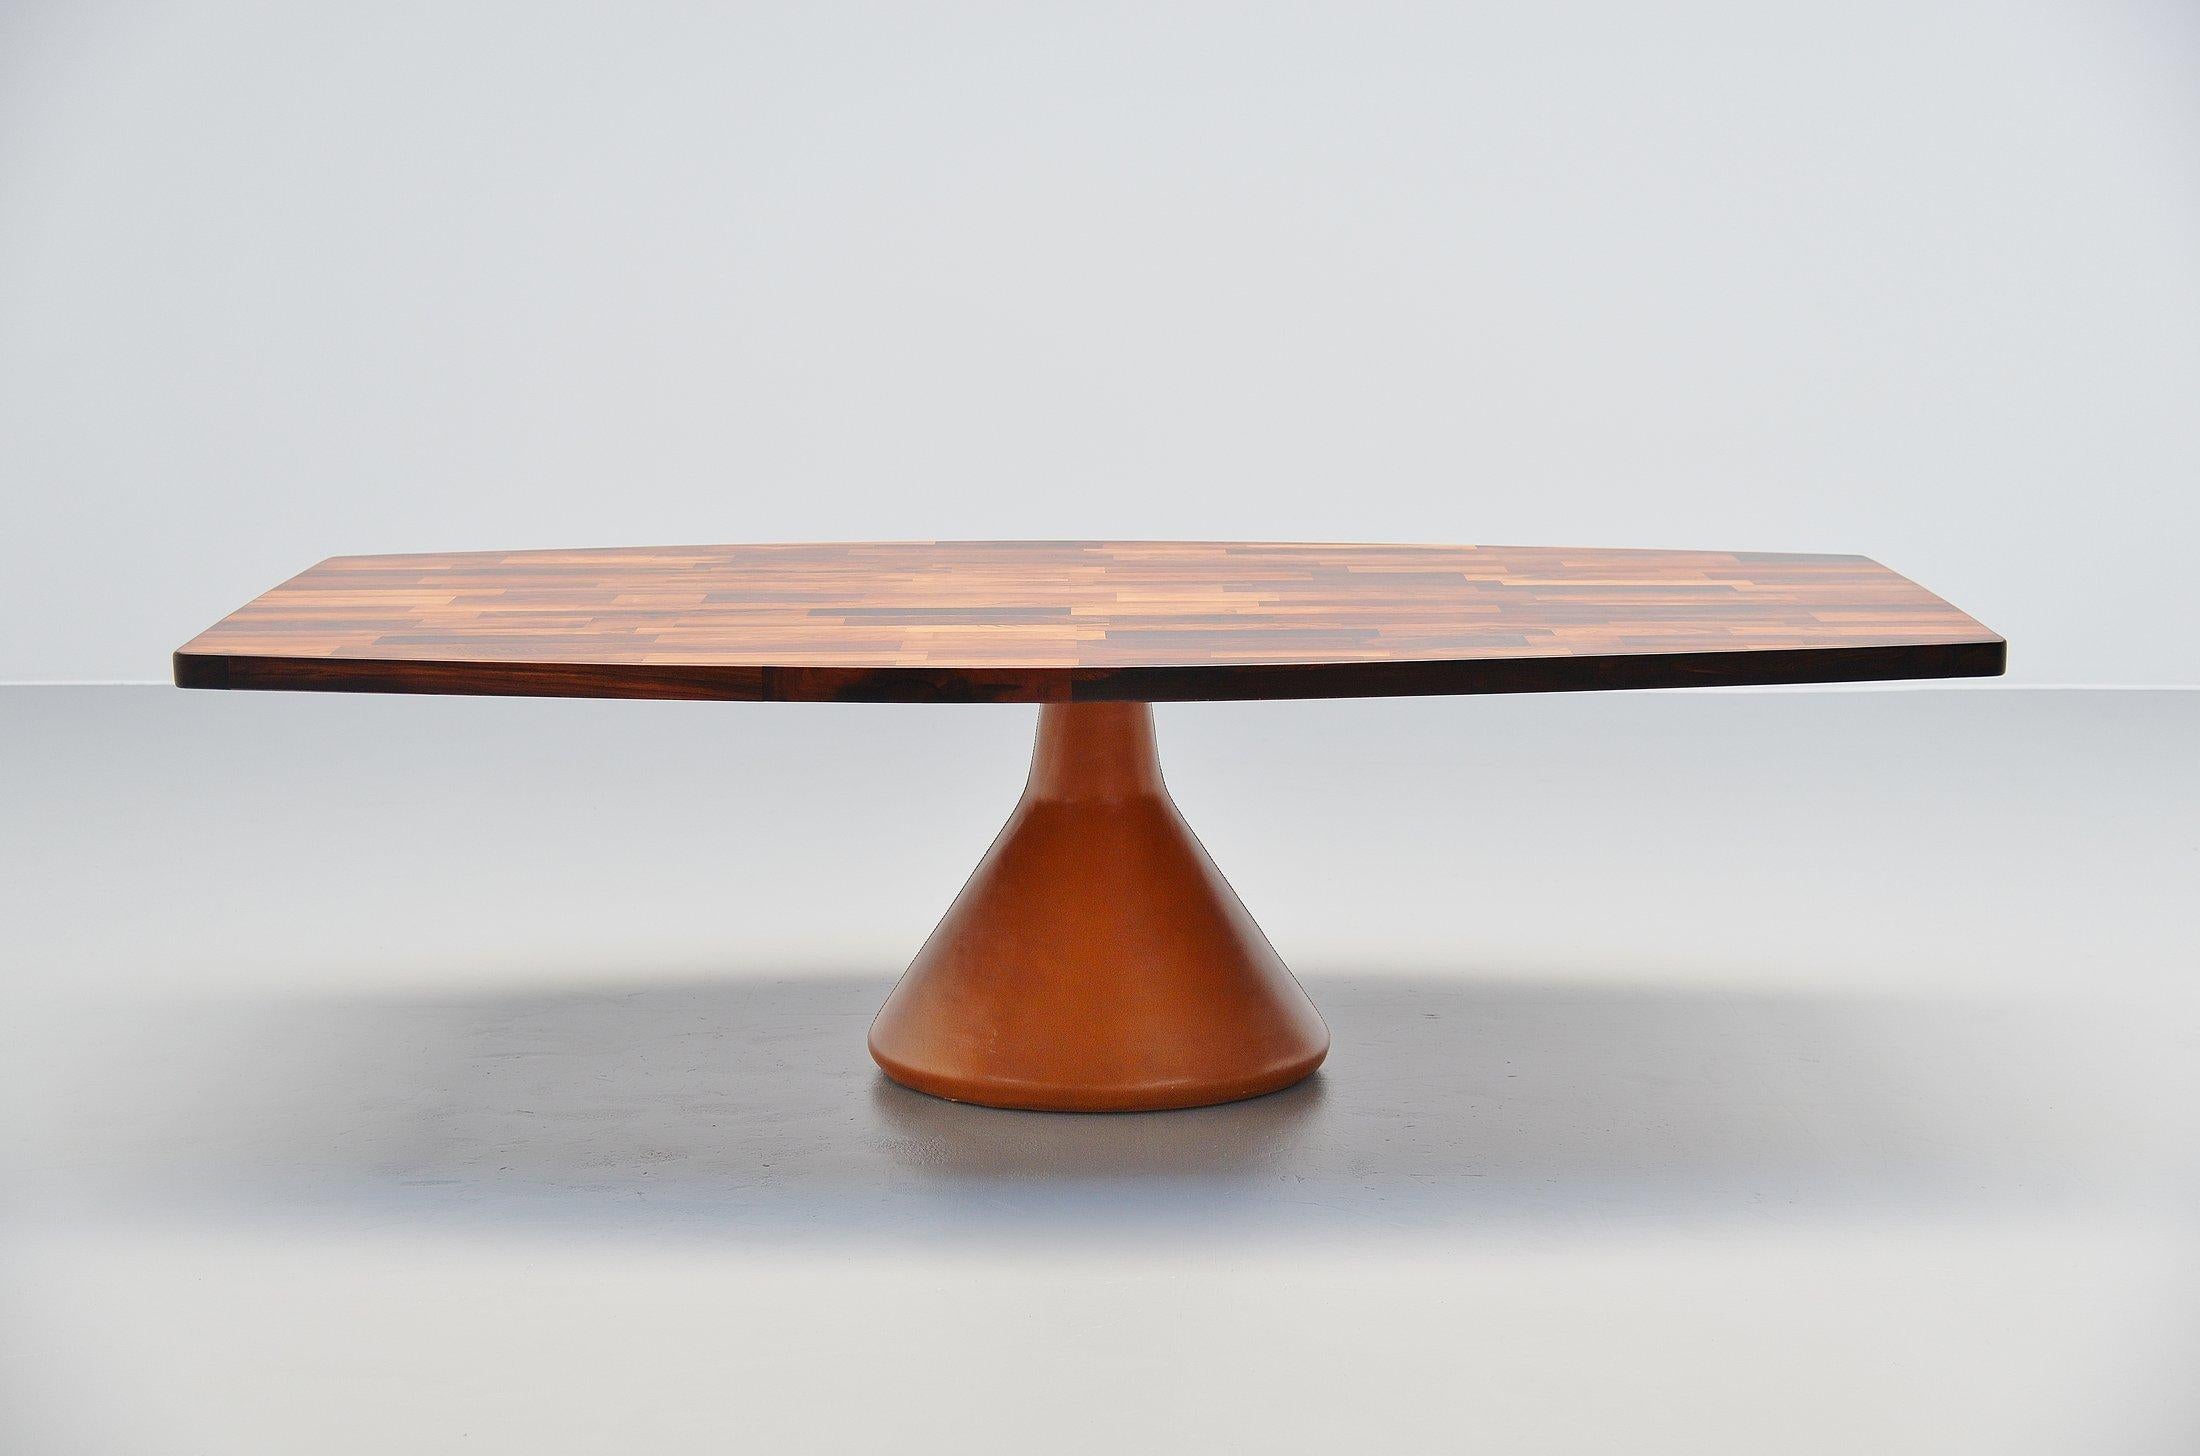 Spectacular so called Guanabara dining table designed by Jorge Zalszupin and manufactured by l'Atelier, Brazil, 1960. This stunning large table has a rosewood patchwork top supported by a solid concrete base, covered with cognac leather. A thick